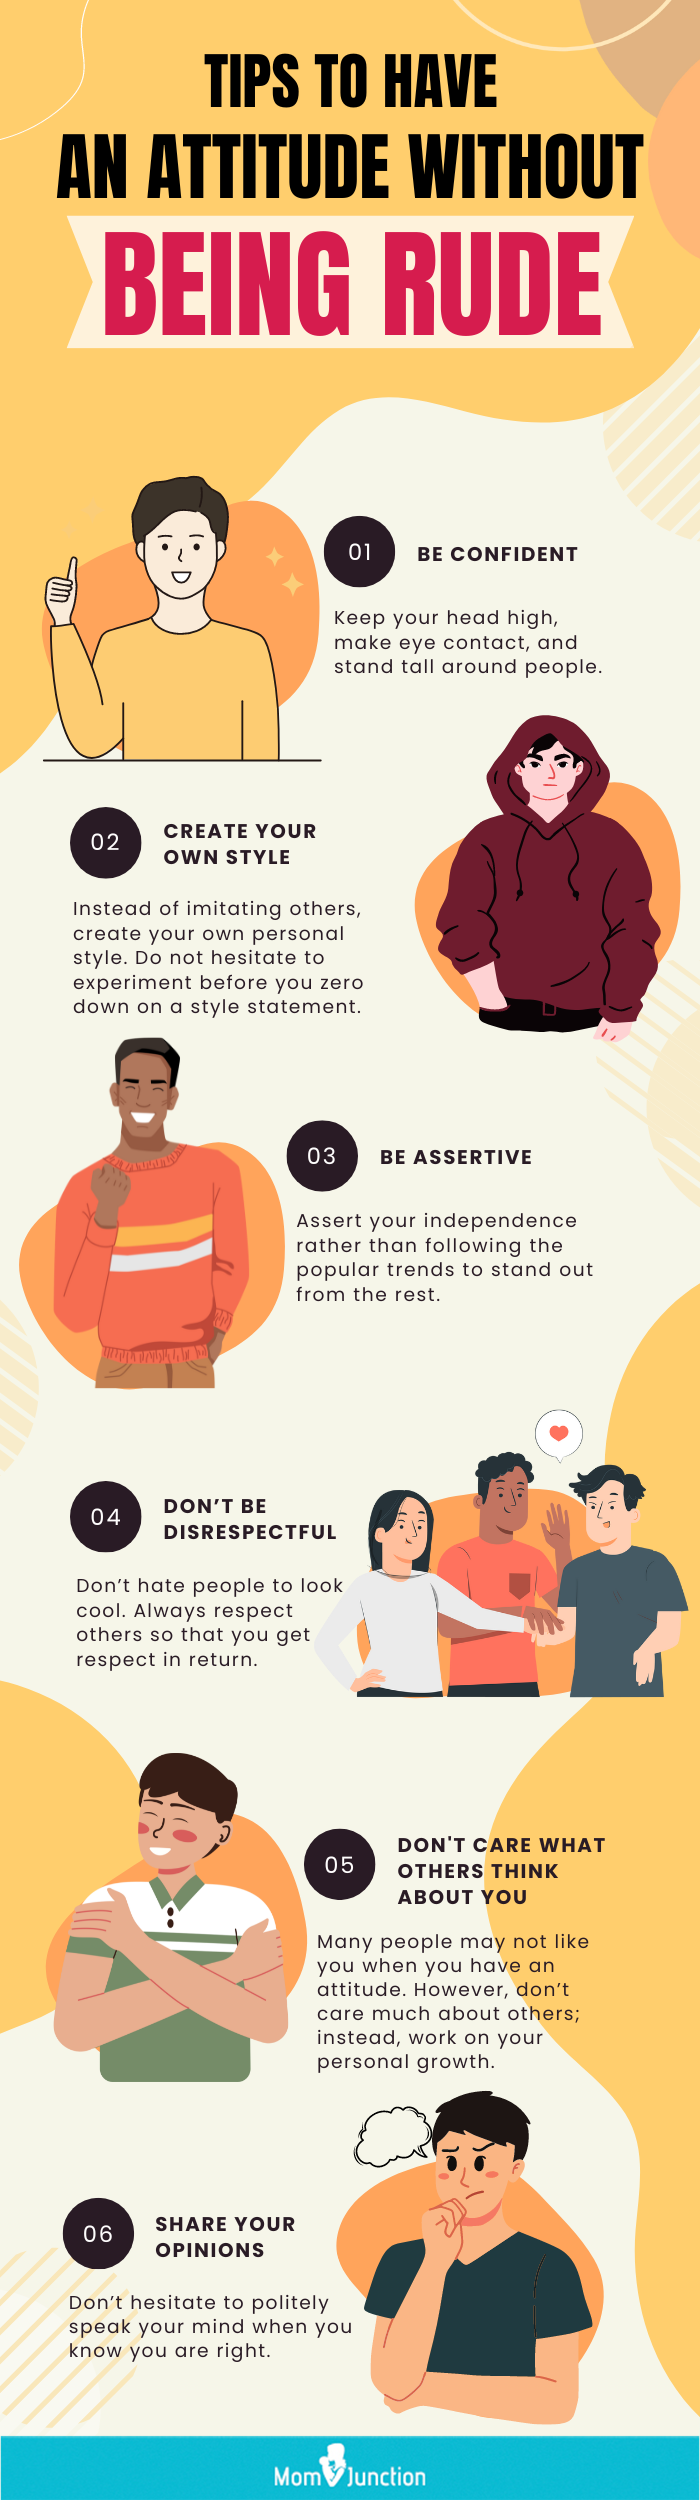 tips to have an attitude without being rude (infographic)